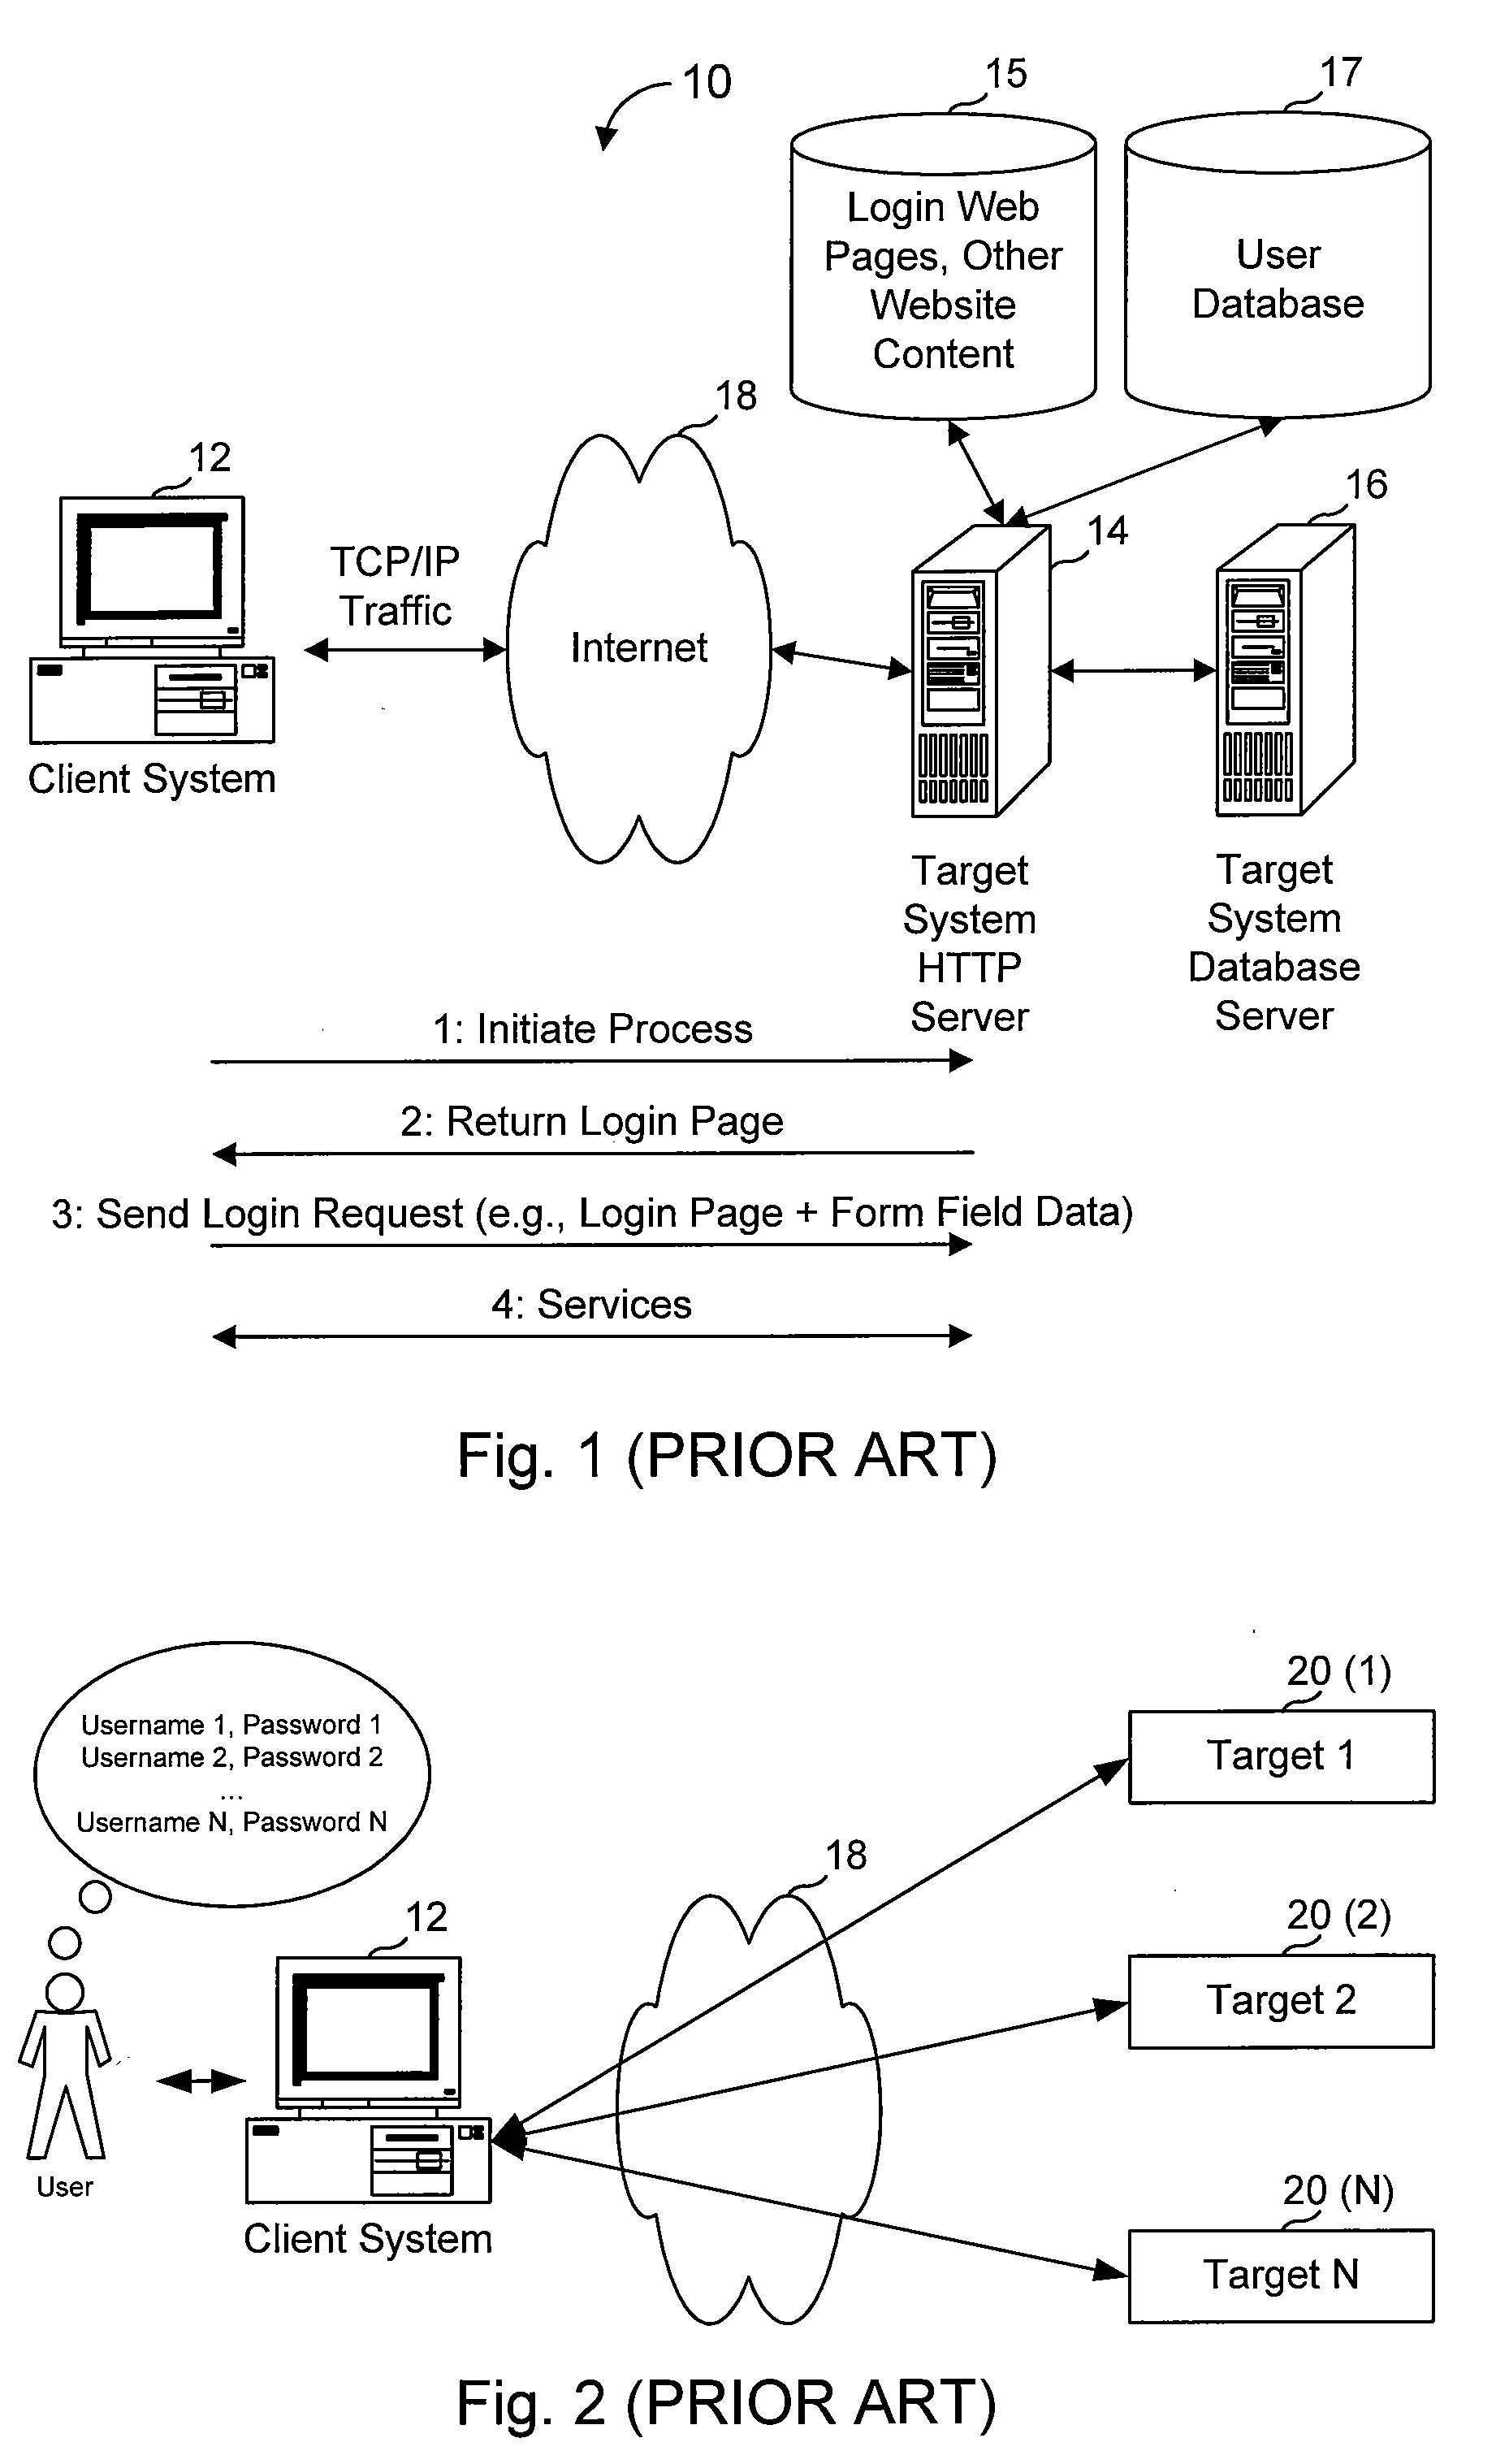 User-administered single sign-on with automatic password management for web server authentication